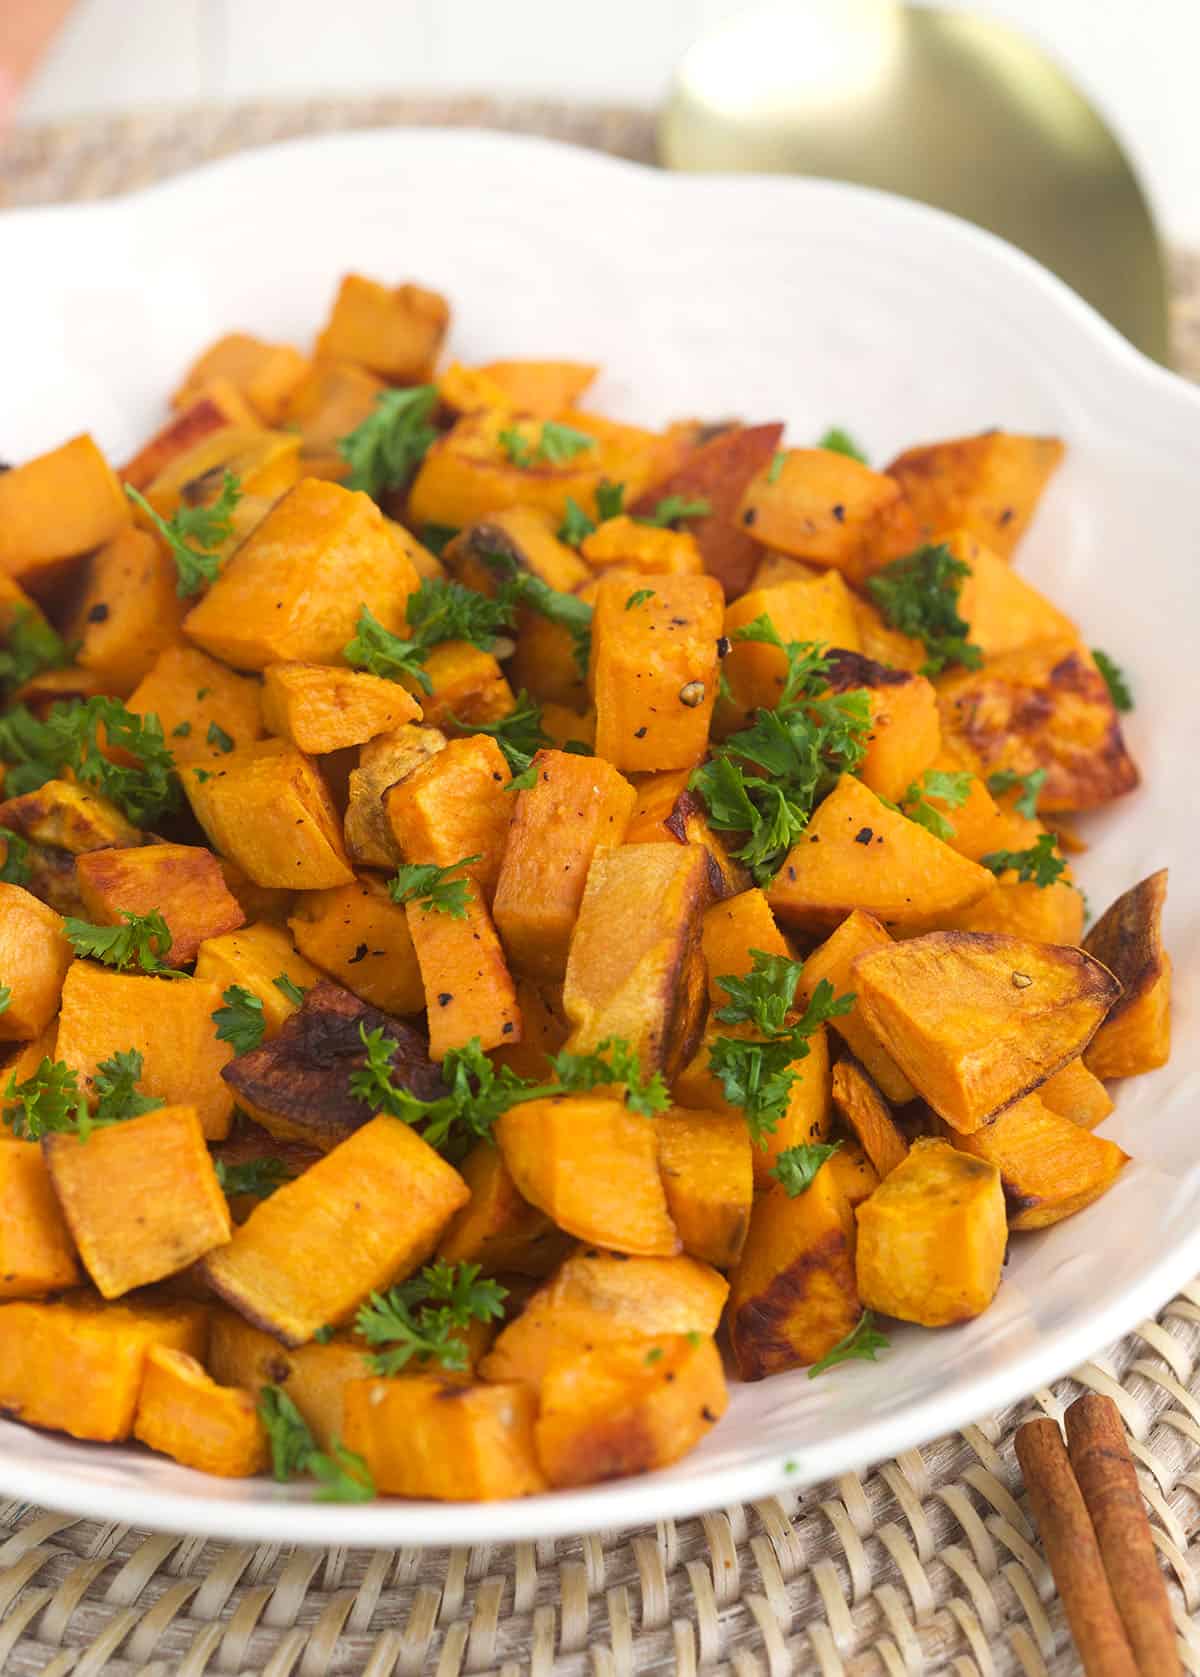 Herbs garnish a serving of roasted sweet potatoes.